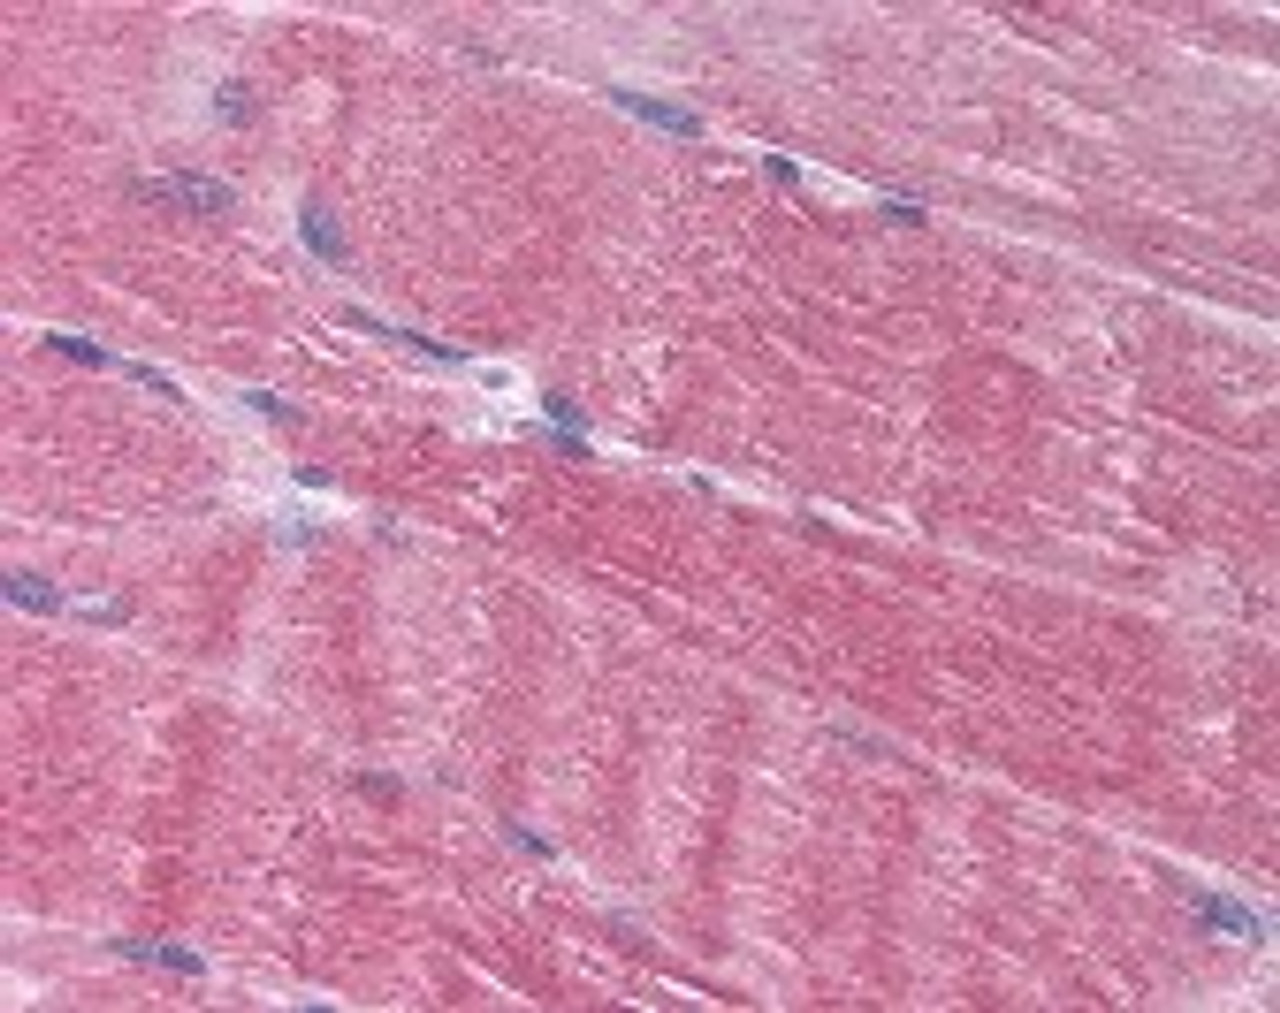 Immunohistochemistry staining of AMPD1 in skeletal muscle tissue using AMPD1 Antibody.